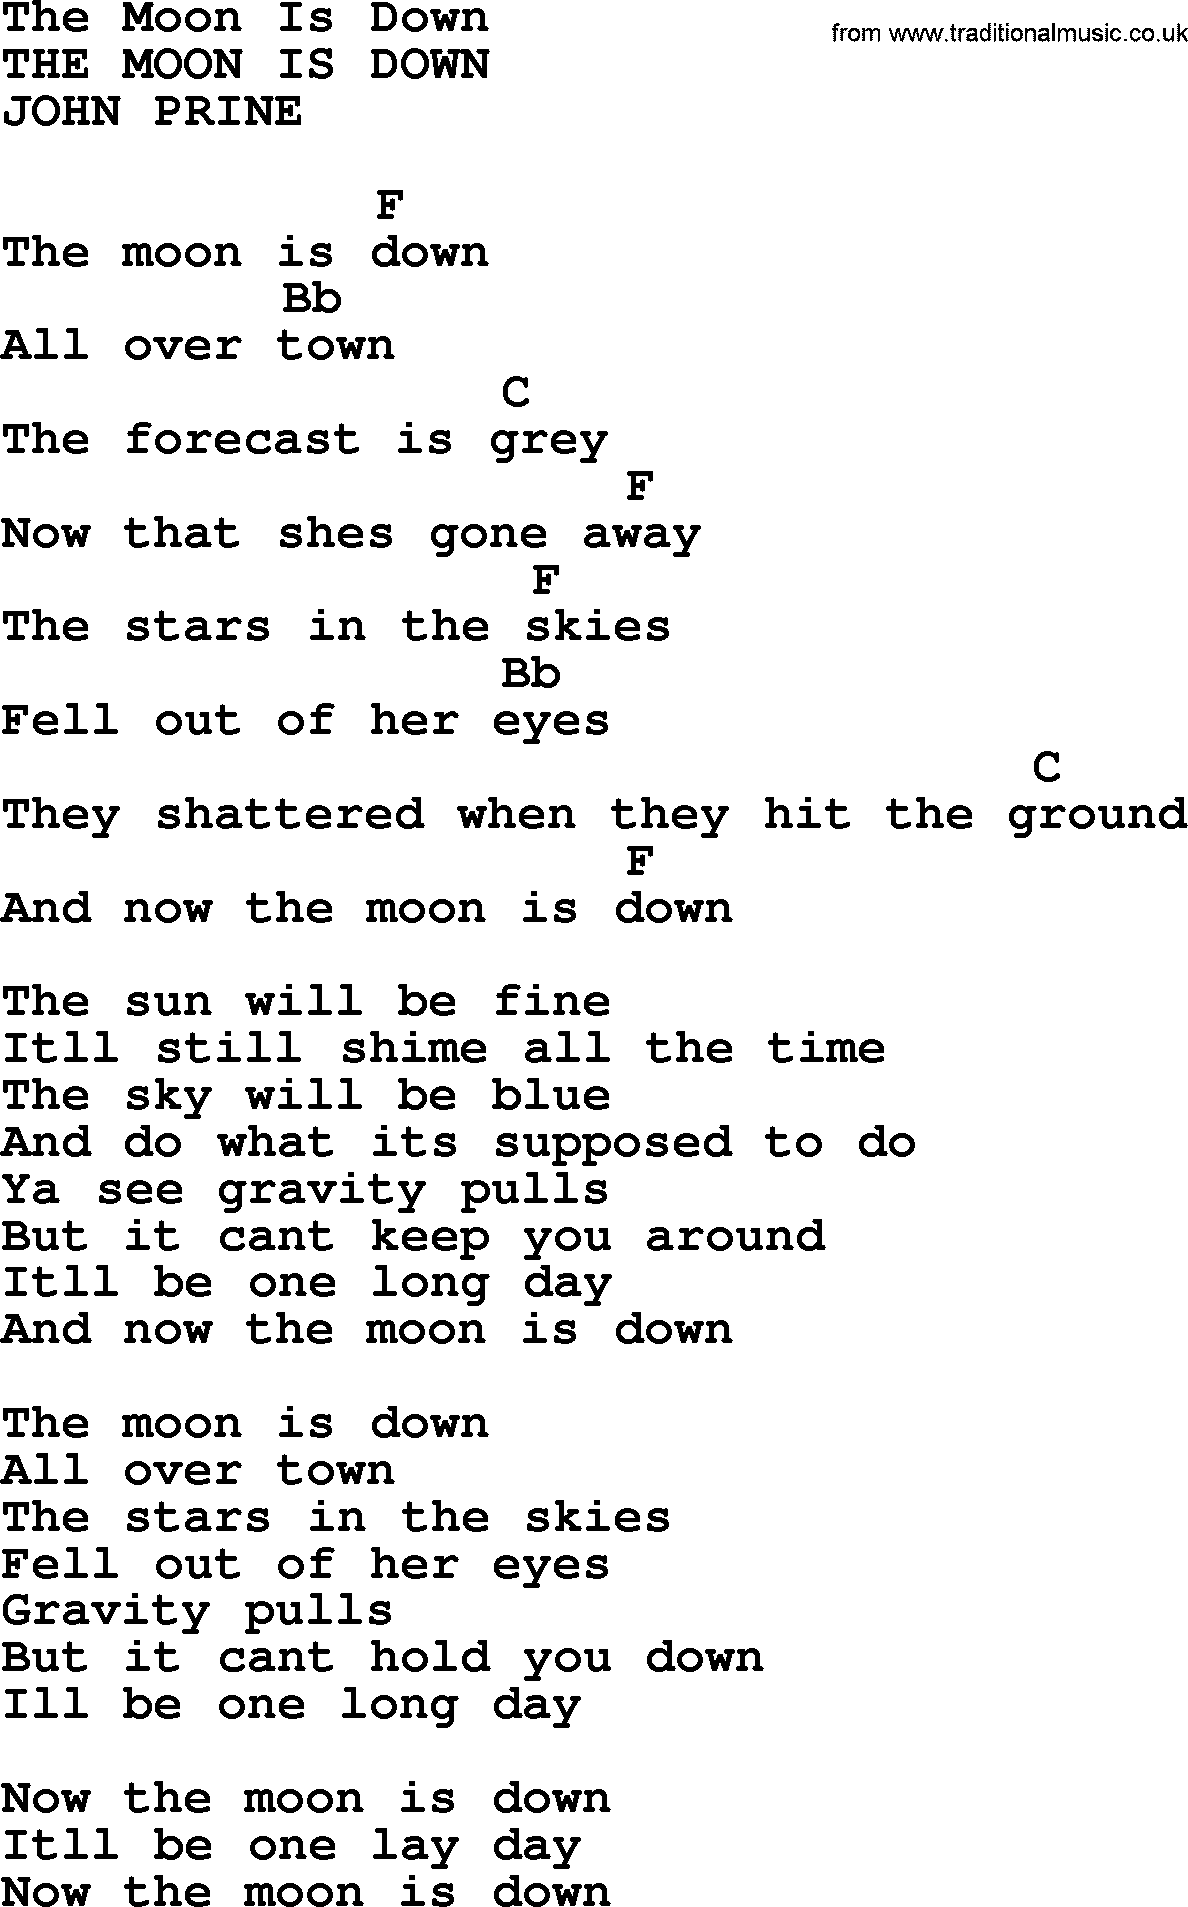 Bluegrass song: The Moon Is Down, lyrics and chords